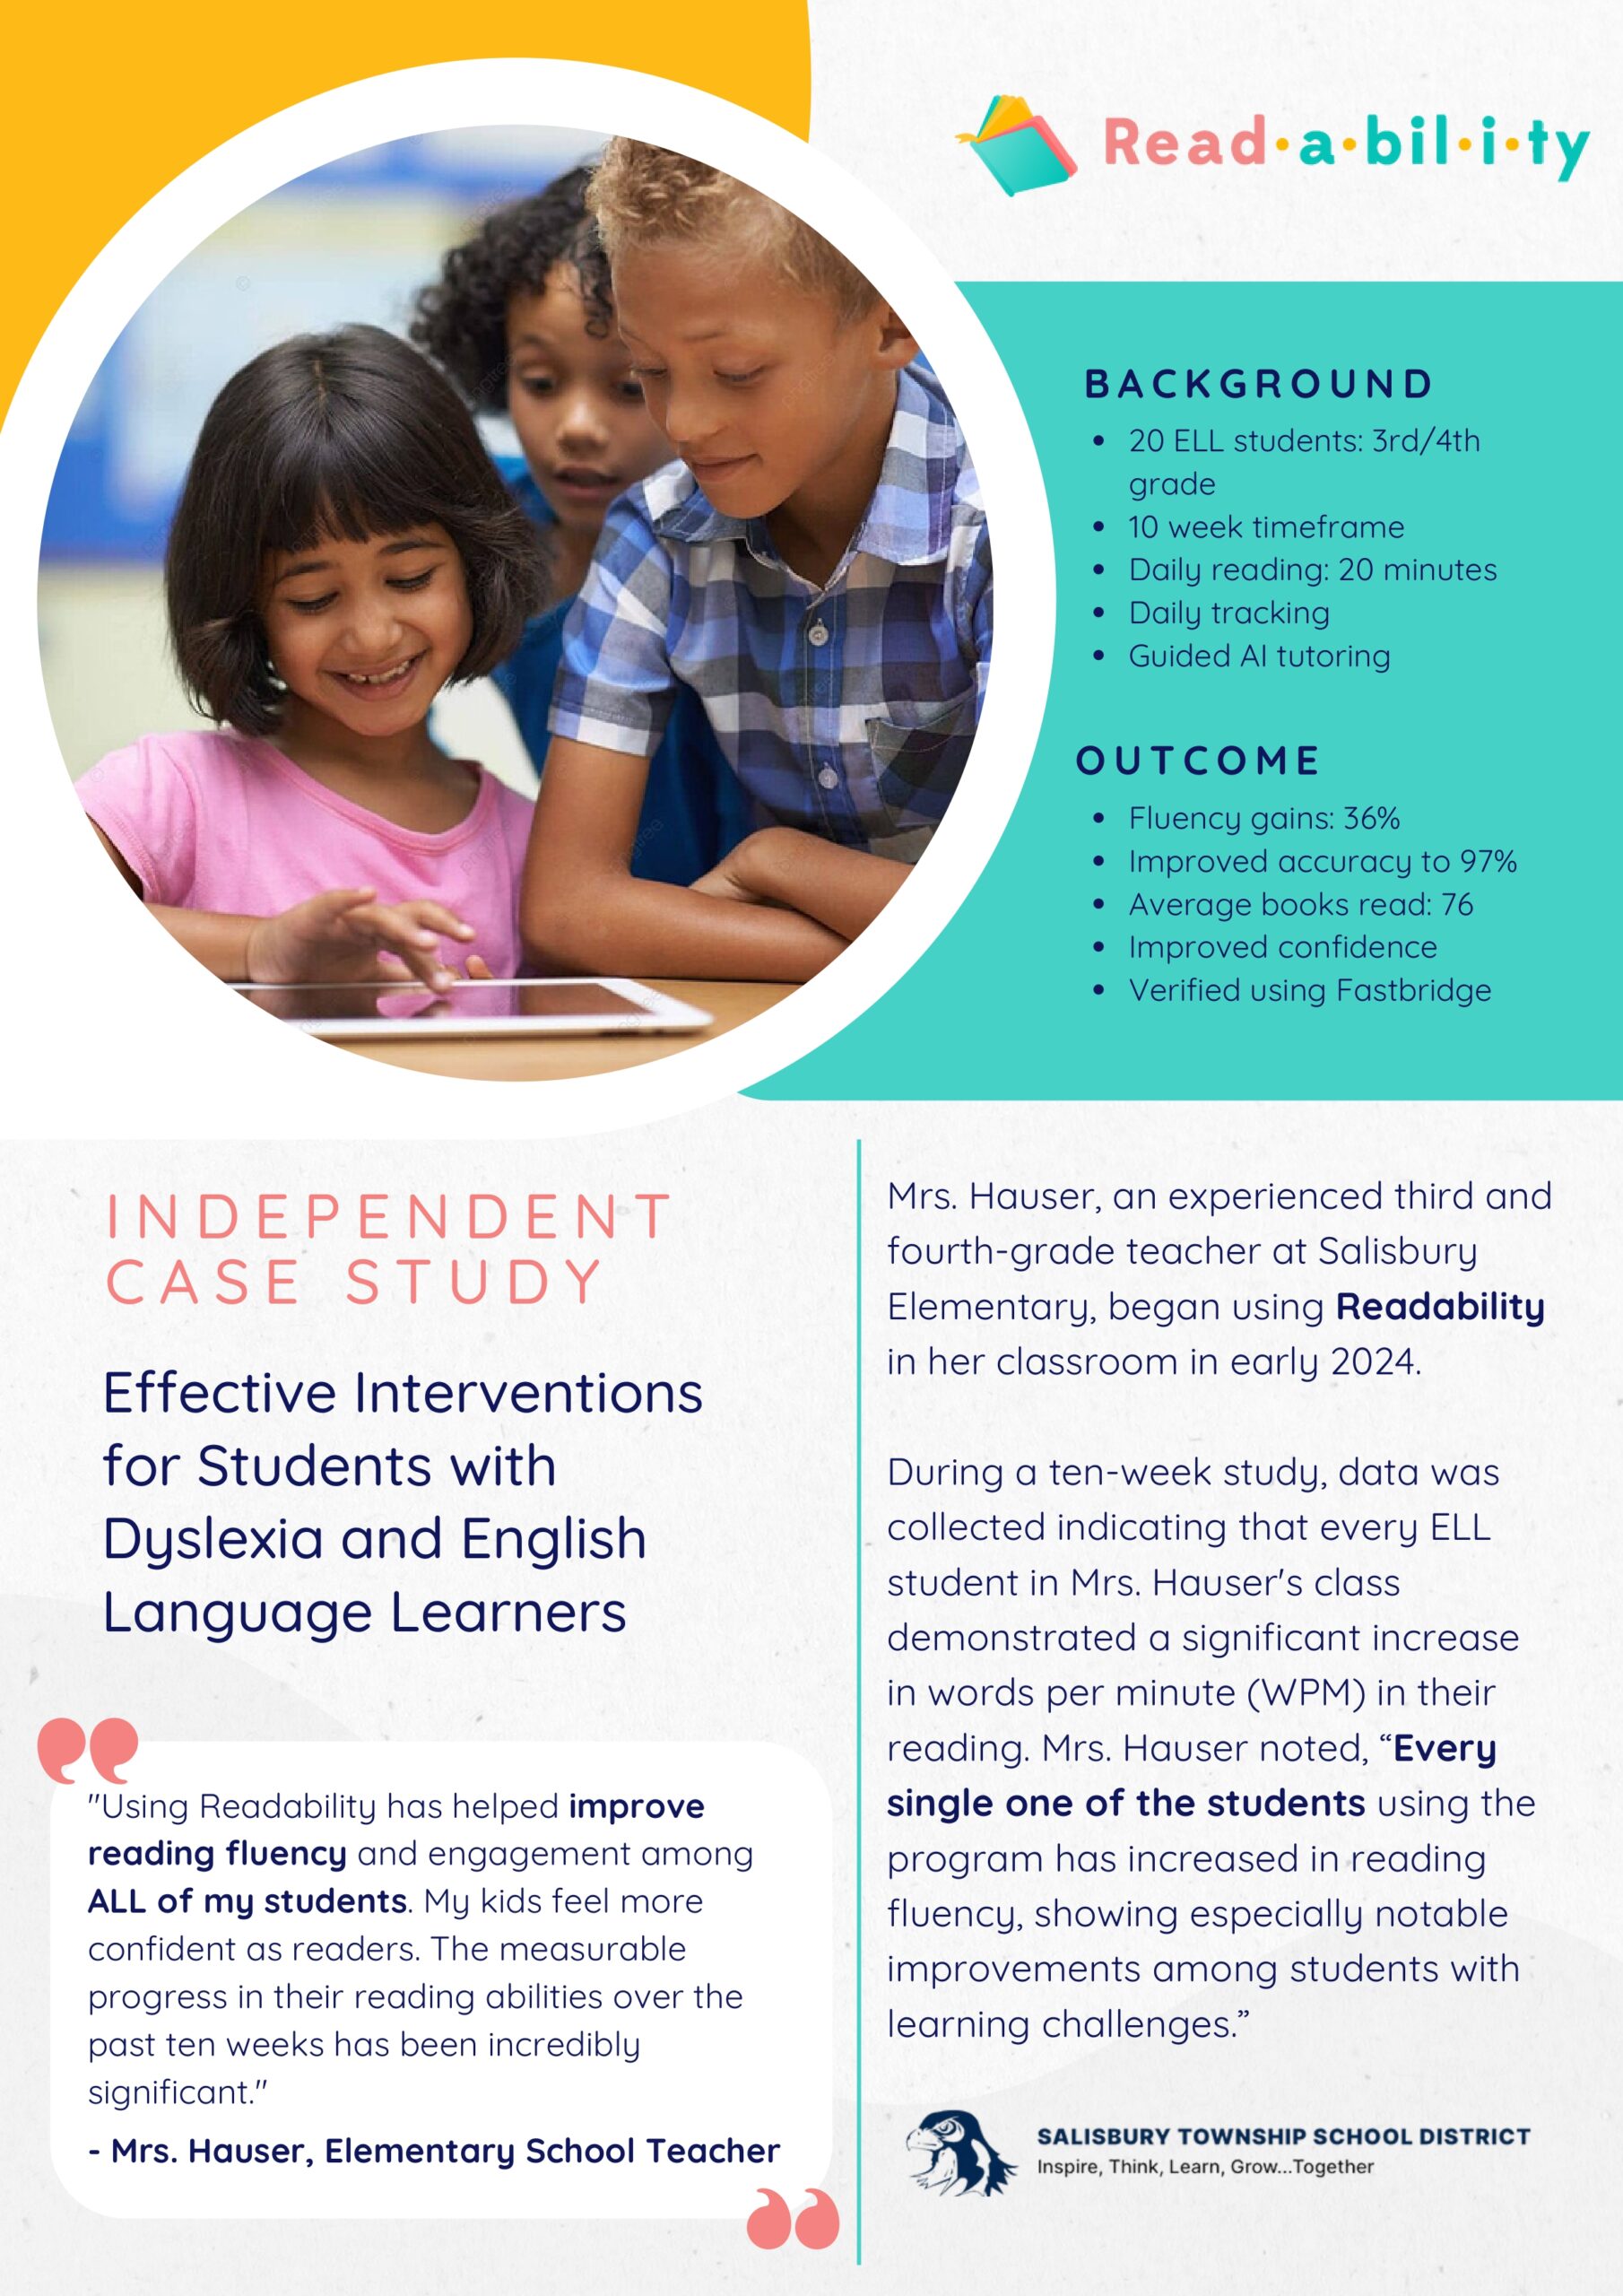 Effective Interventions for Students with Dyslexia and English Language Learners